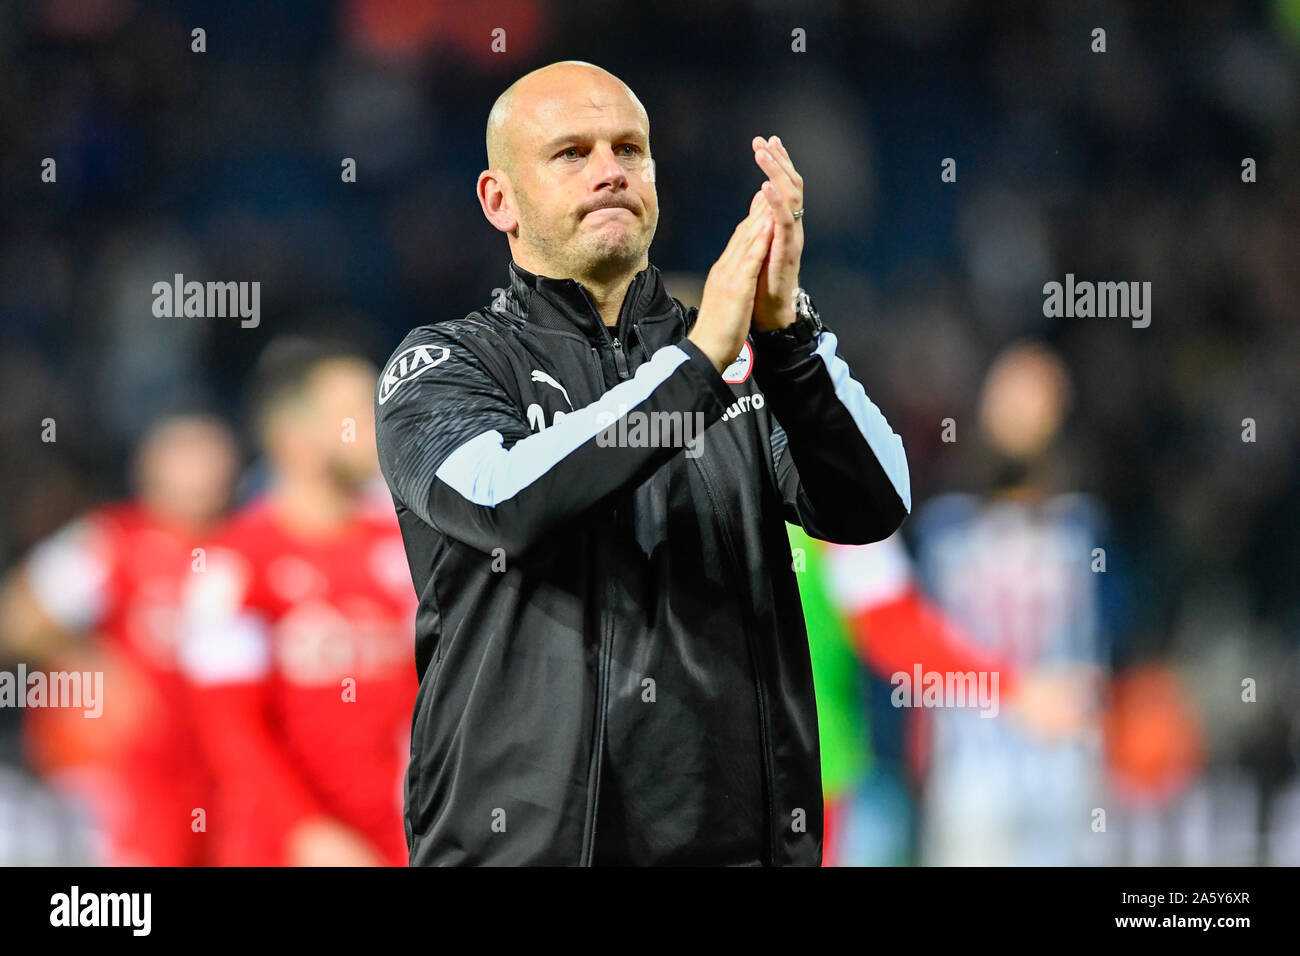 22nd October 2019, The Hawthorns, West Bromwich, England; Sky Bet Championship, West Bromwich Albion v Barnsley : Barnsley Caretaker Head Coach, Adam Murray applauds the travelling supporters after his side drew 2-2 with West Bromwich Albion Credit: Simon Whitehead/News Images Stock Photo